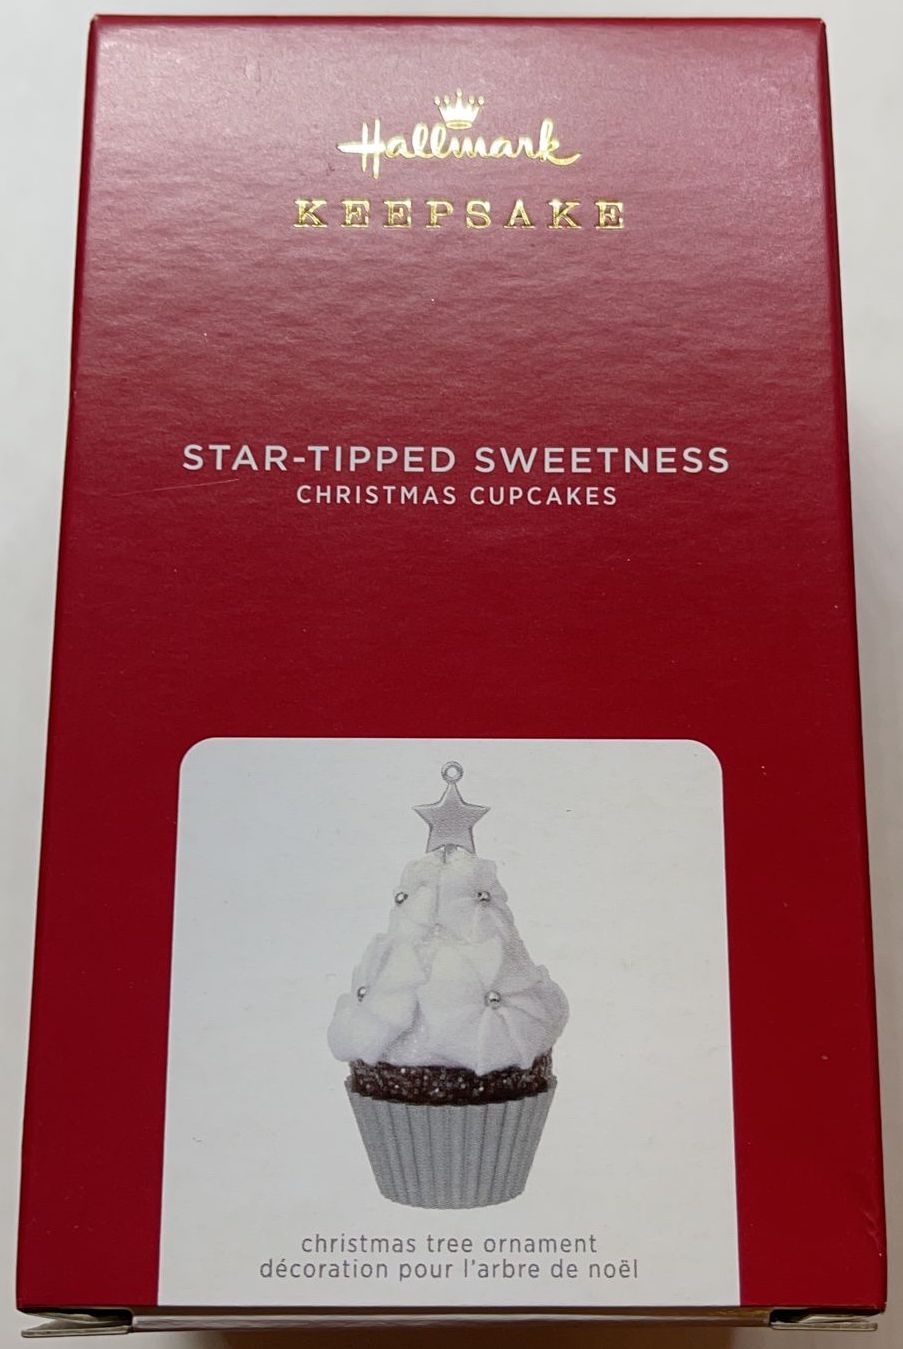 Hallmark 2021 Cupcakes Star-Tipped Sweetness Christmas Ornament New with Box